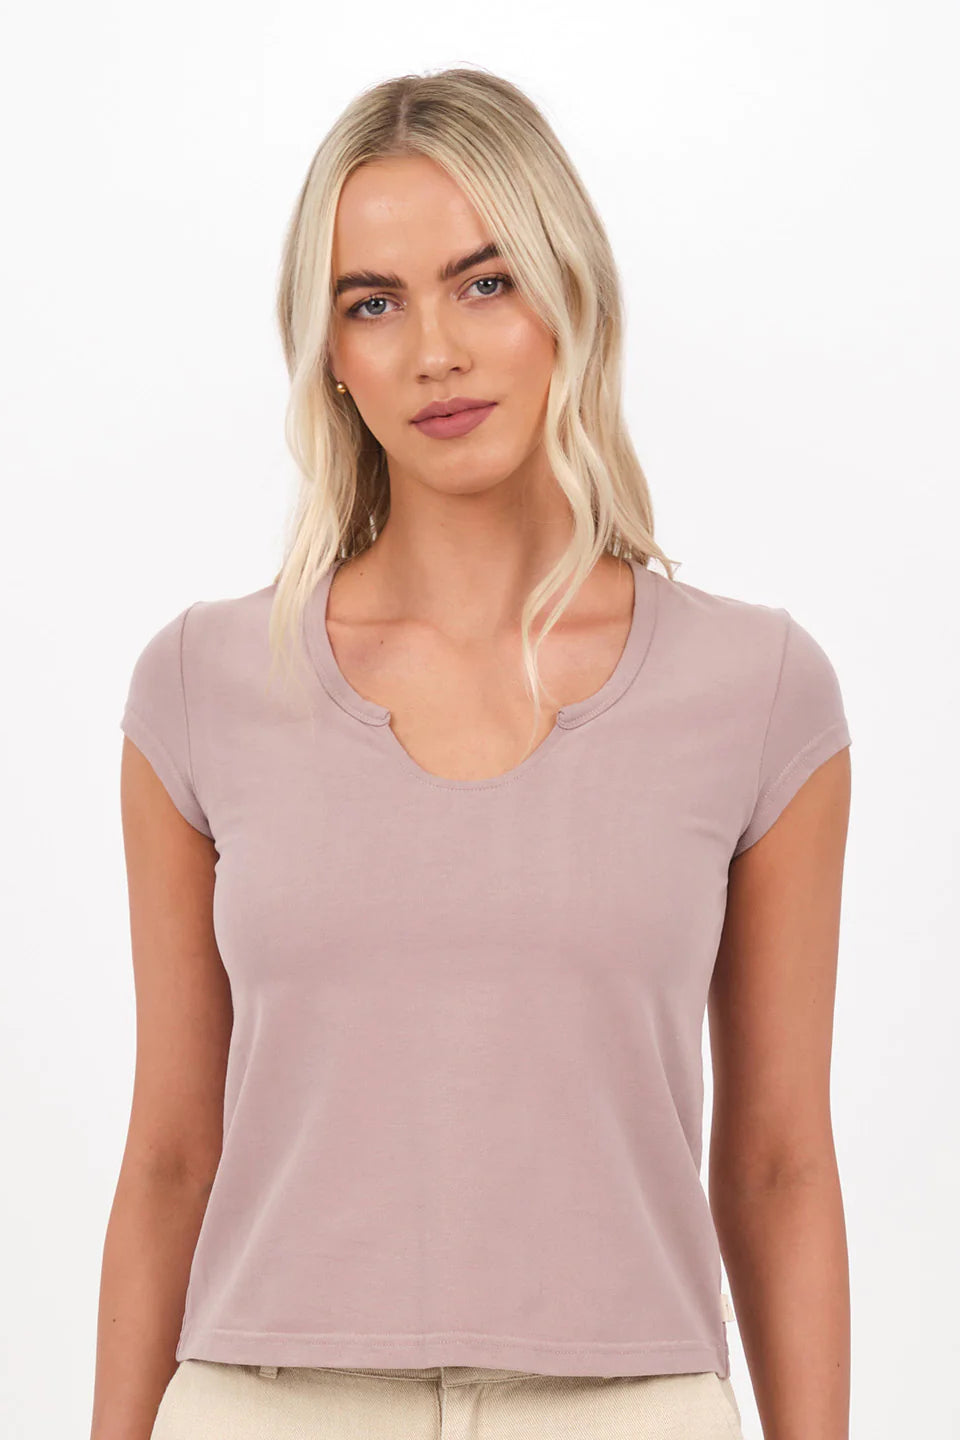 Make out tee - taupe